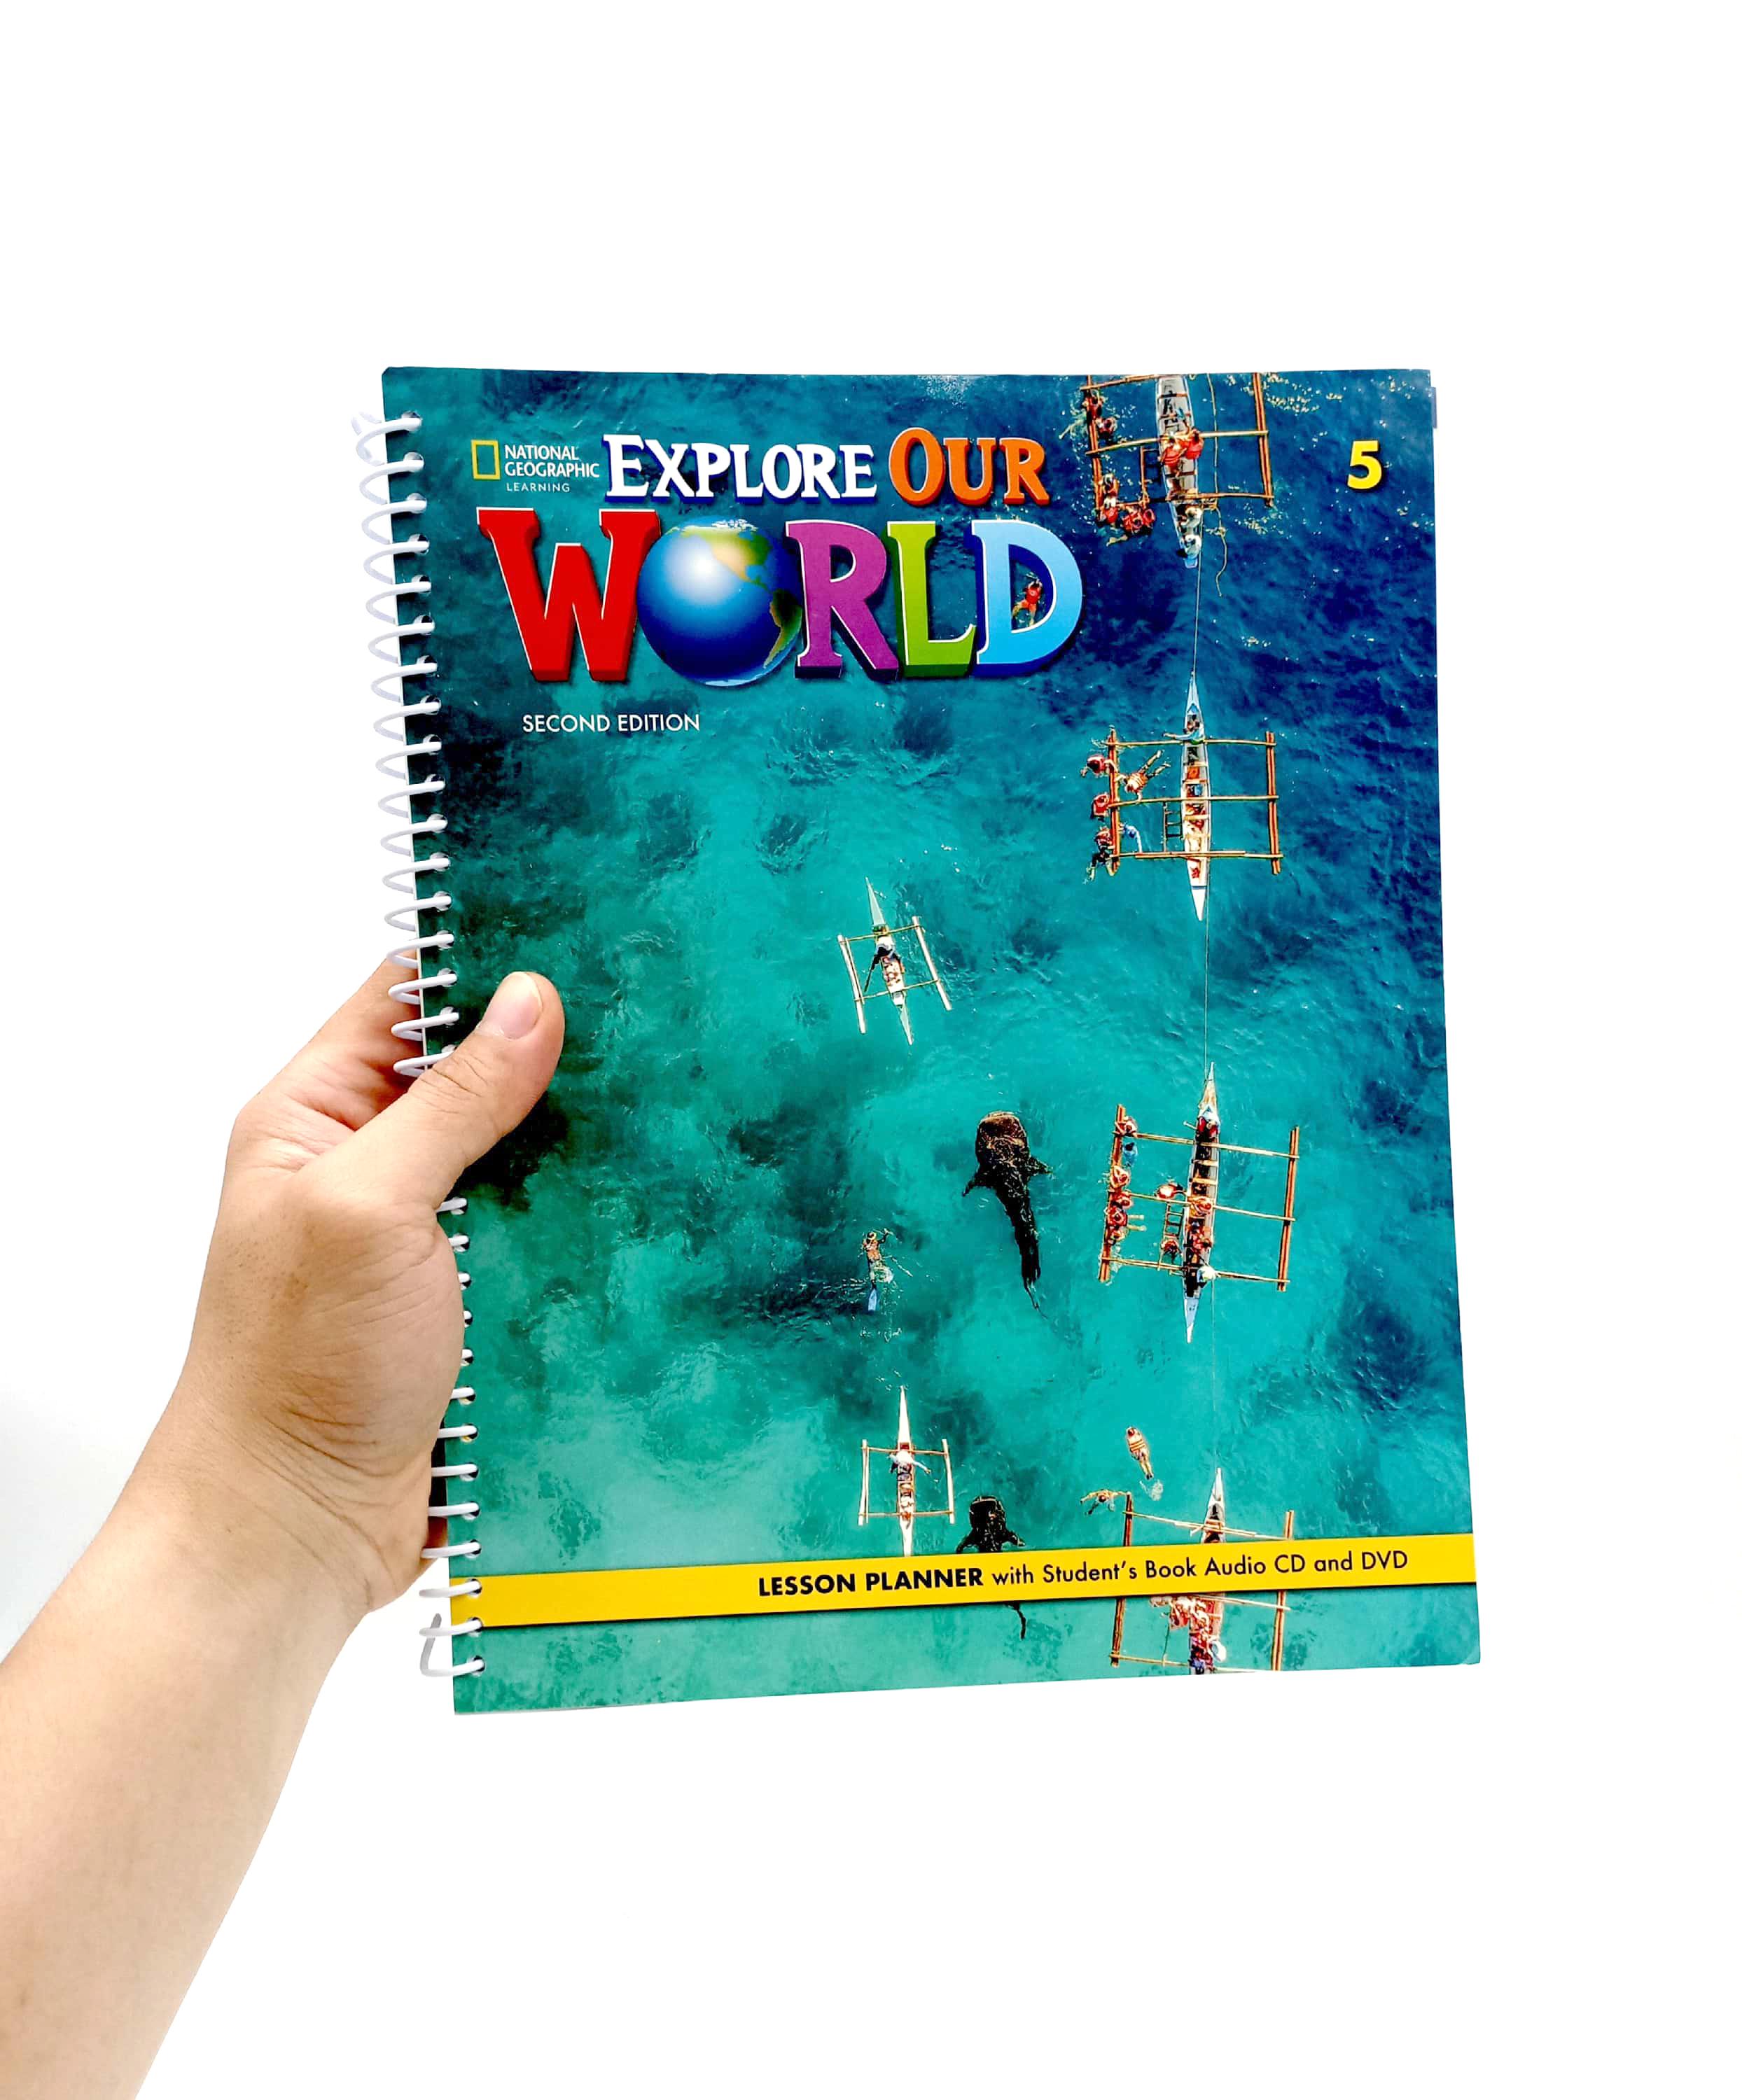 Explore Our World 5 Lesson Planner + Audio CD + Video DVD - 2nd Edition